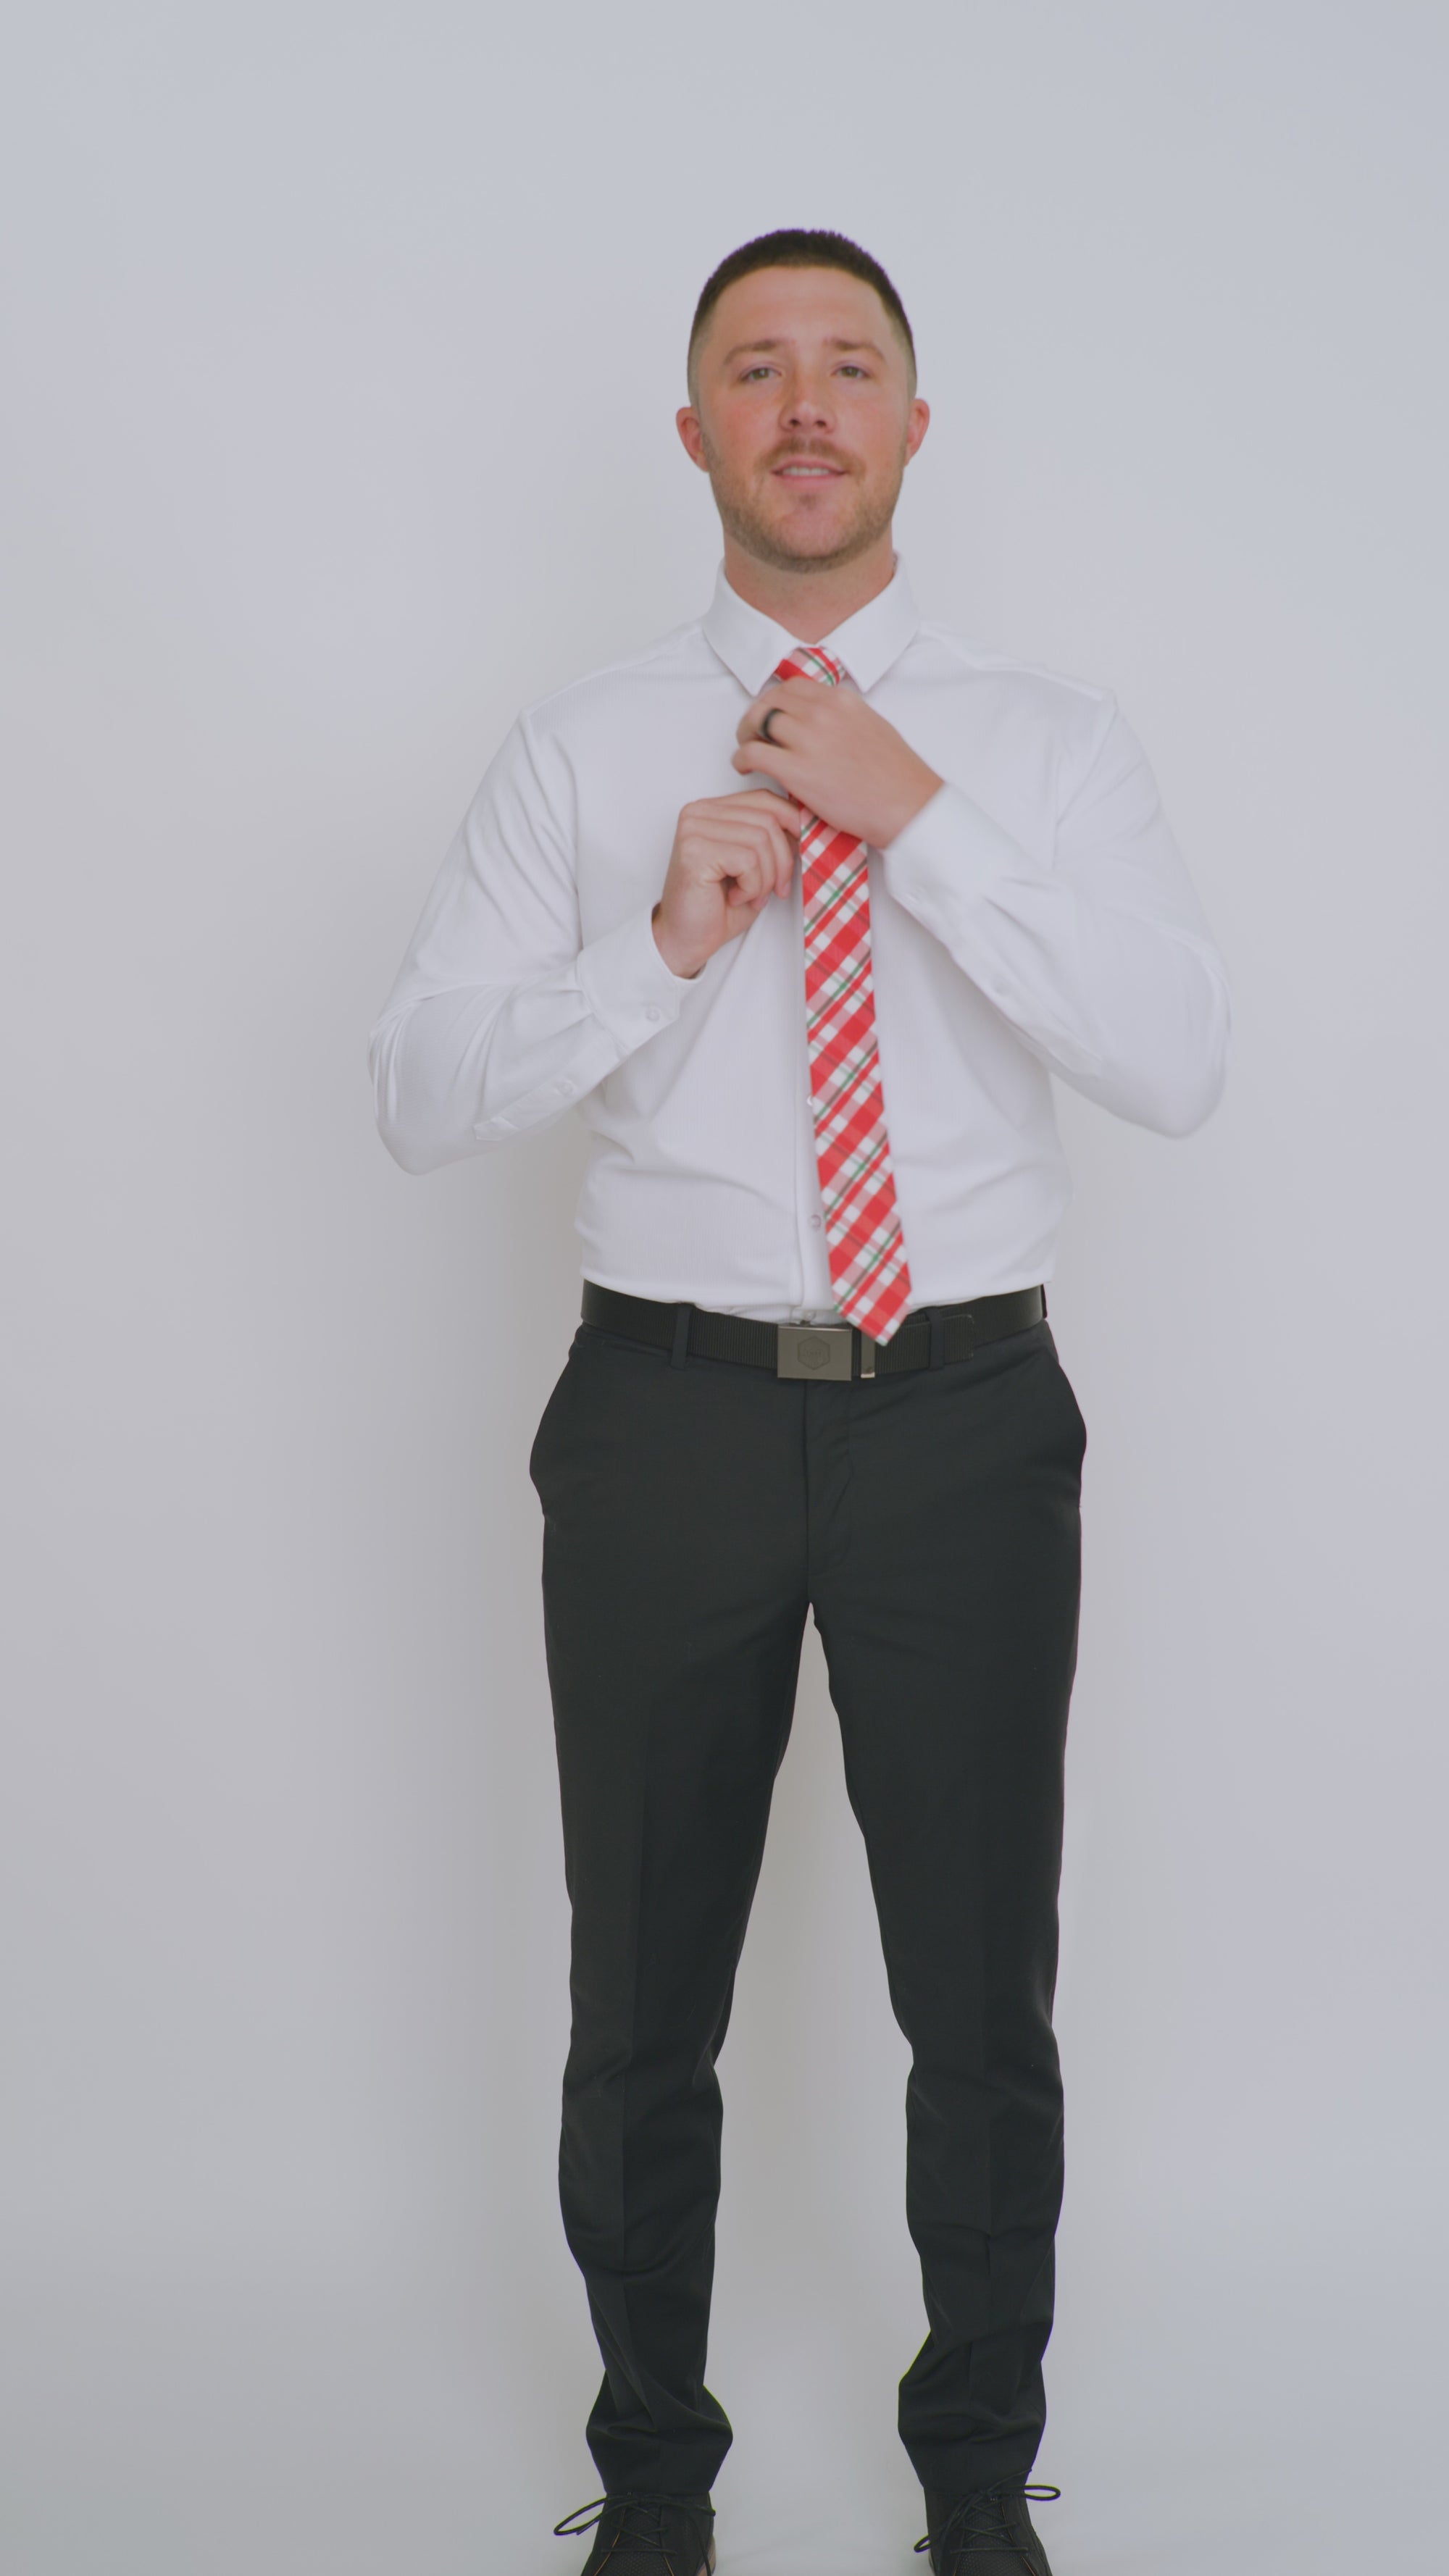 DAZI Wrapped Up Skinny Tie worn with a white shirt, black belt and black suit pants.